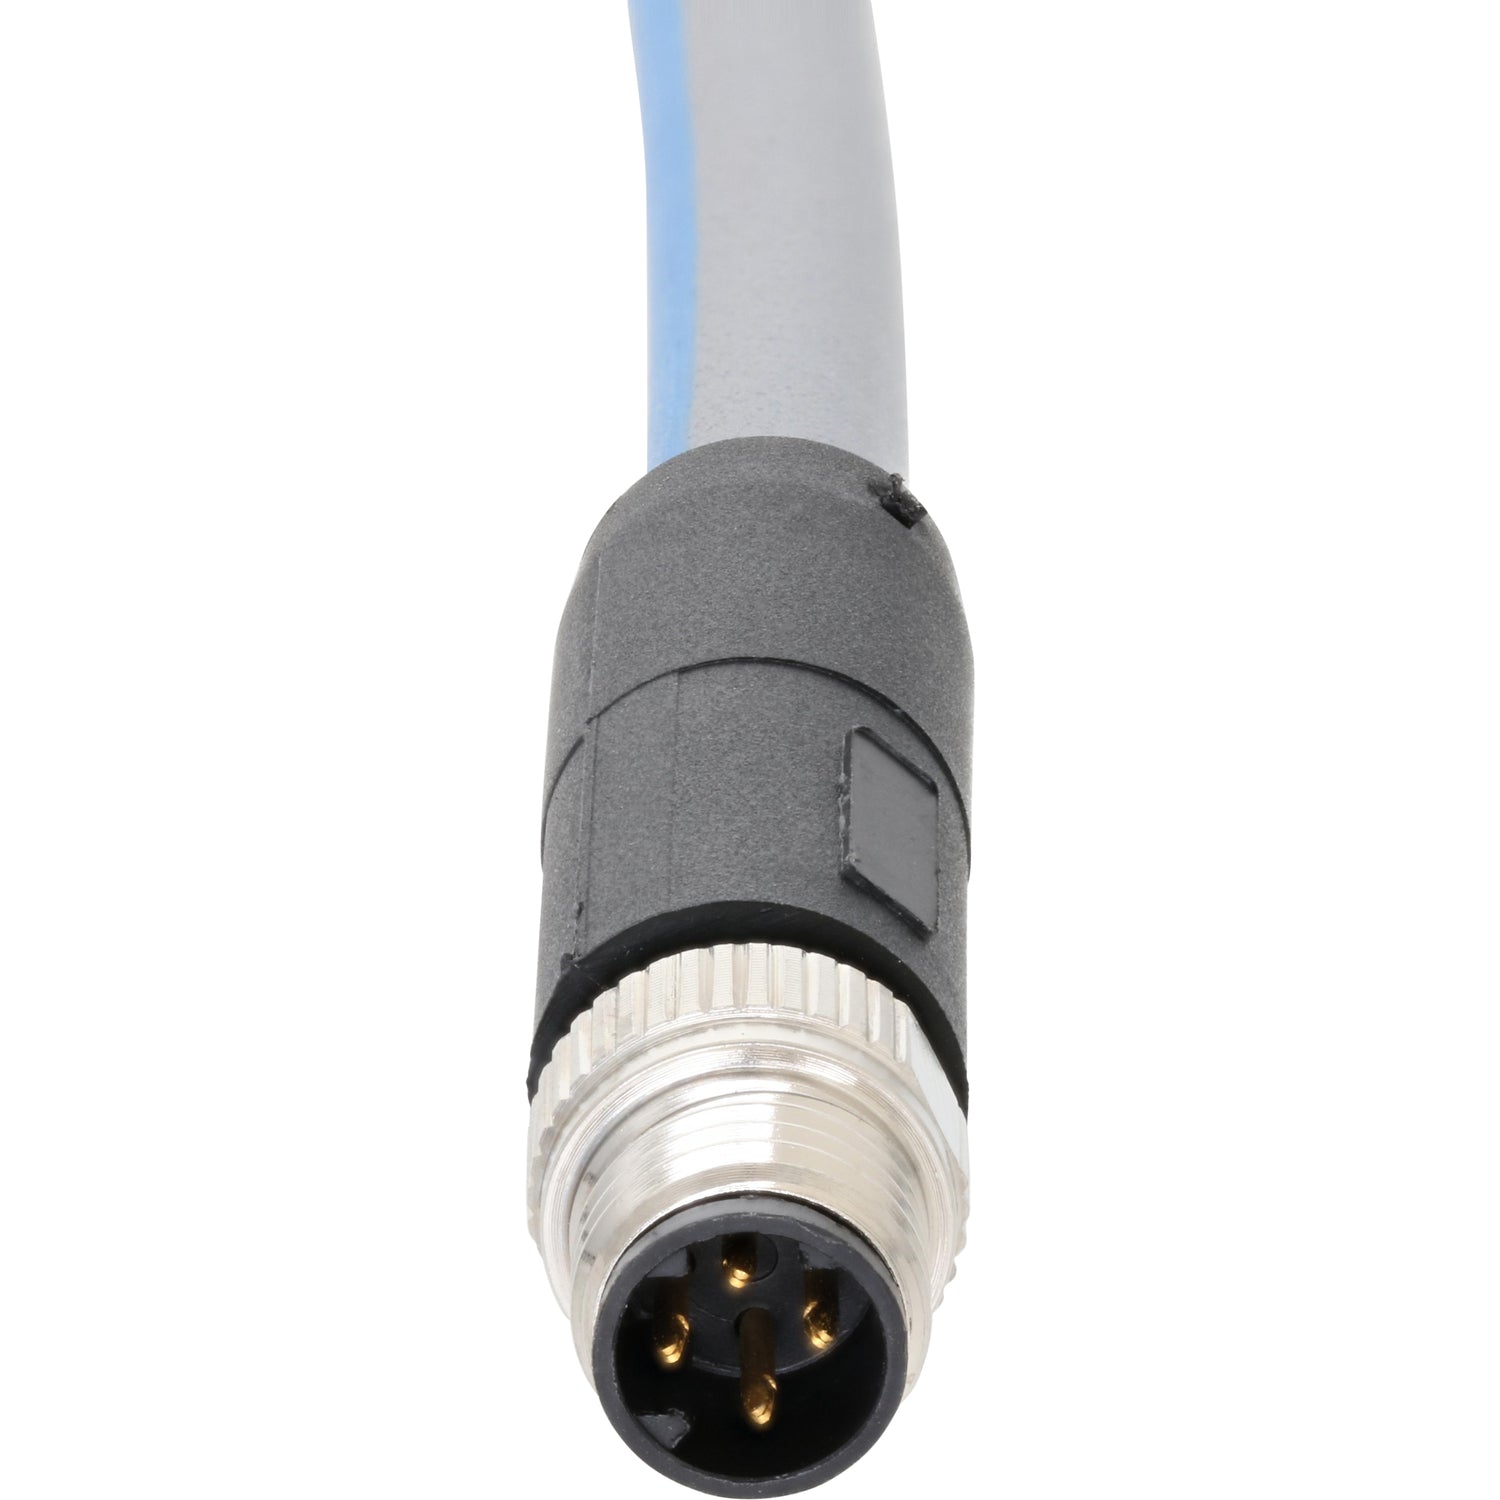 Blue and grey connecting cable with nickel plated four pin male connector on white background. 